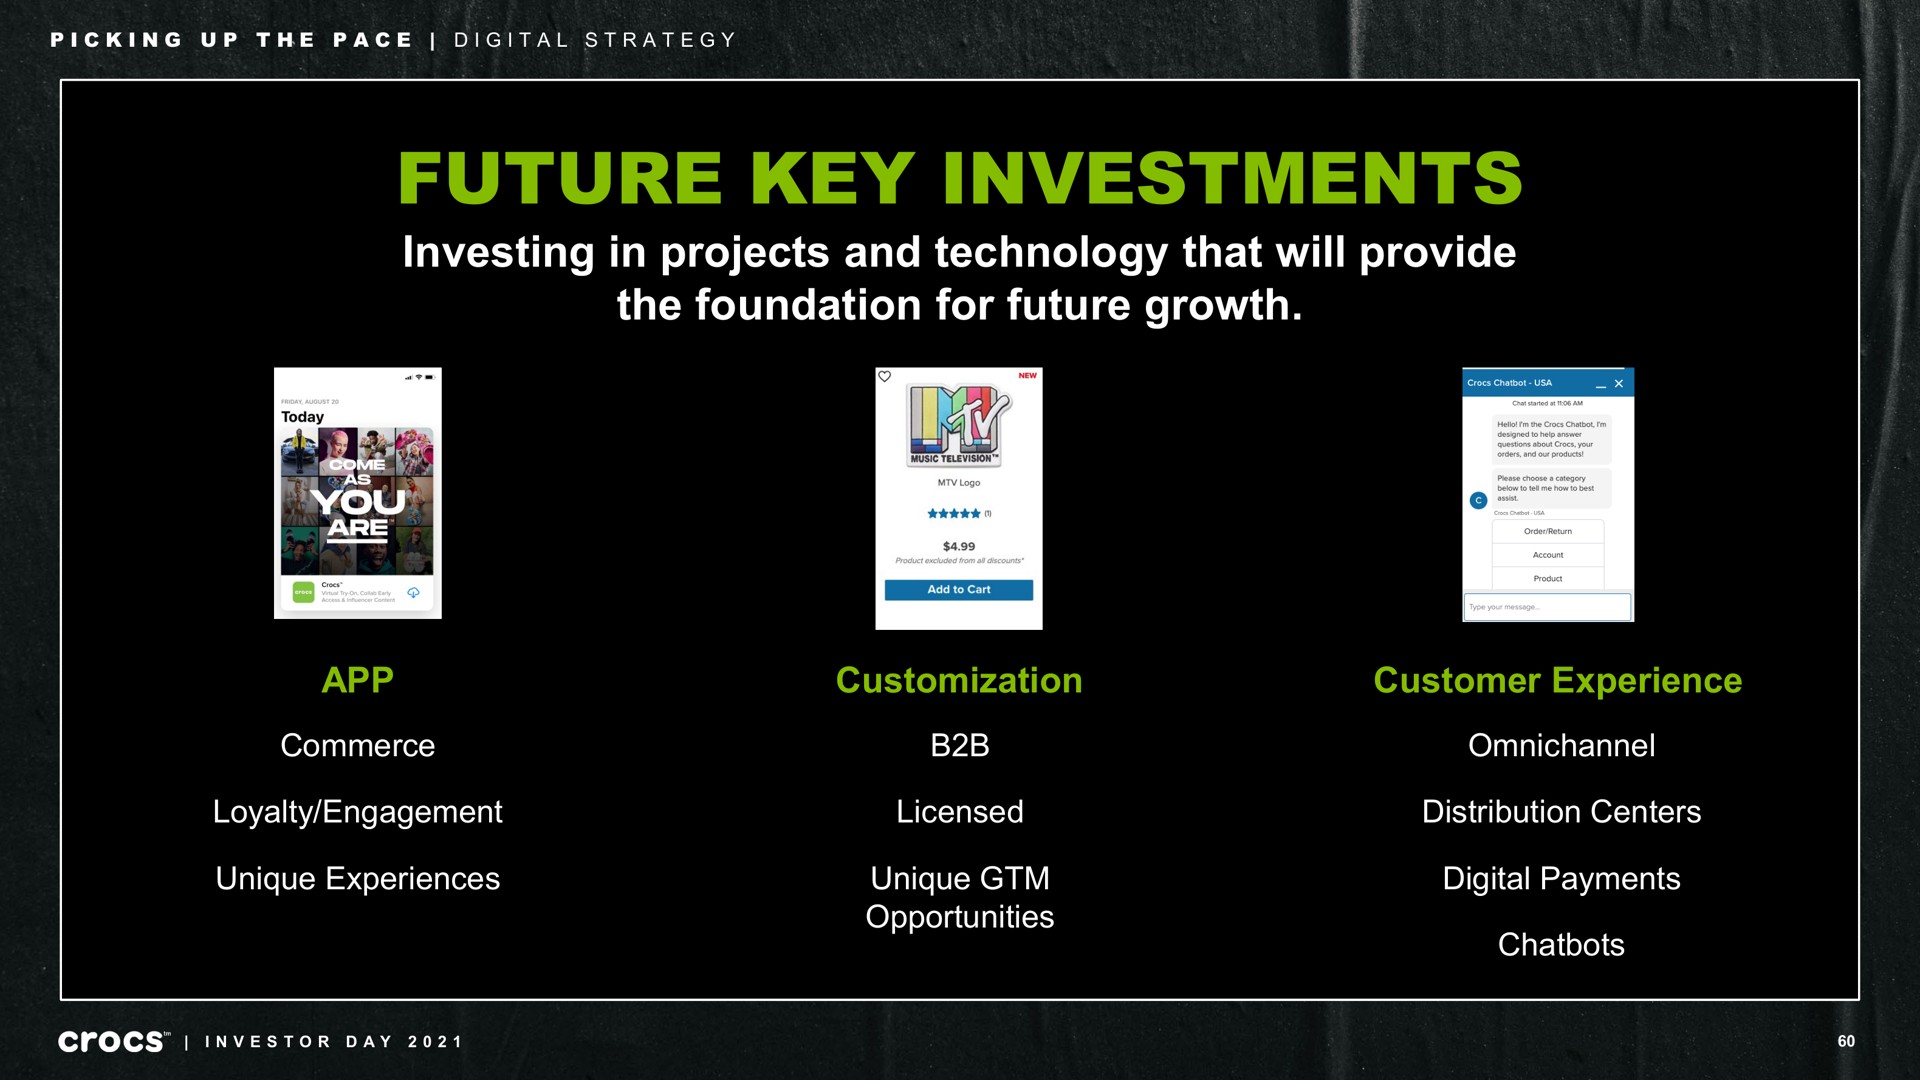 future key investments investing in projects and technology that will provide the foundation for future growth commerce loyalty engagement unique experiences customer experience licensed unique opportunities distribution centers digital payments picking up pace strategy a investor day a | Crocs